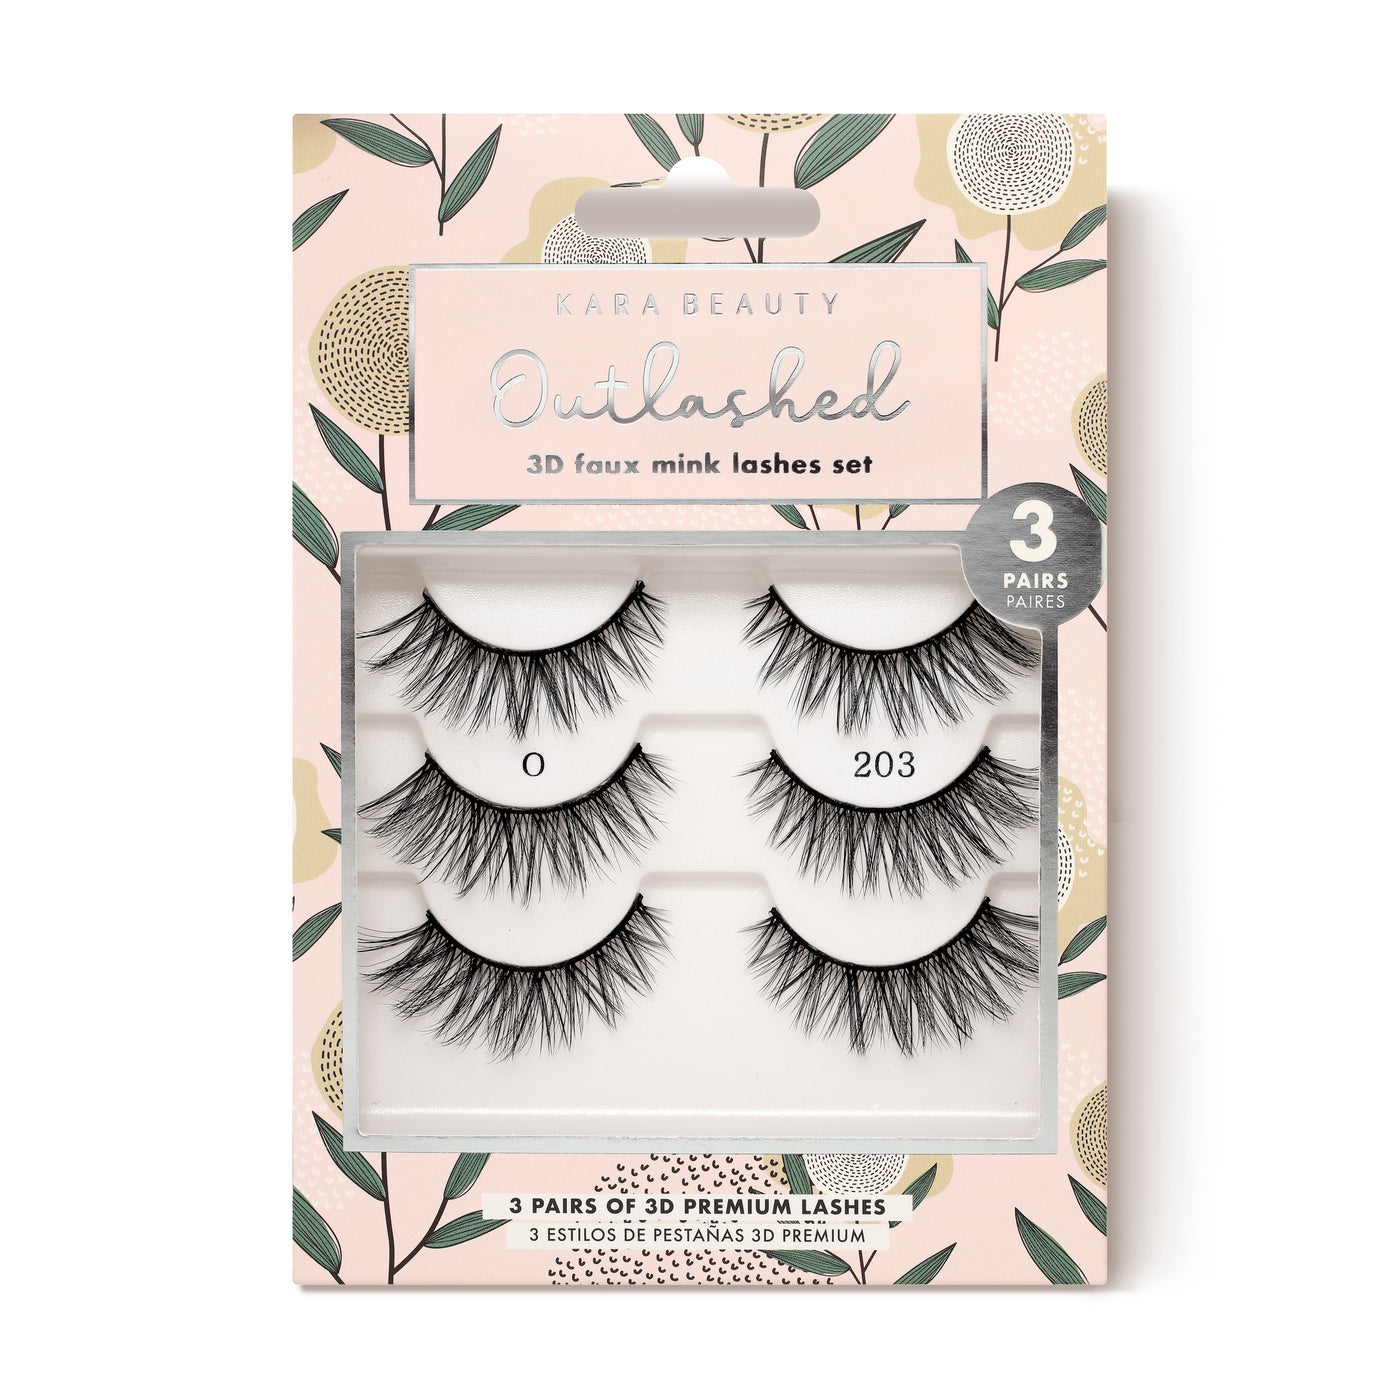 KL3203 OUTLASHED 3D Faux Mink Lashes 3 PAIRS